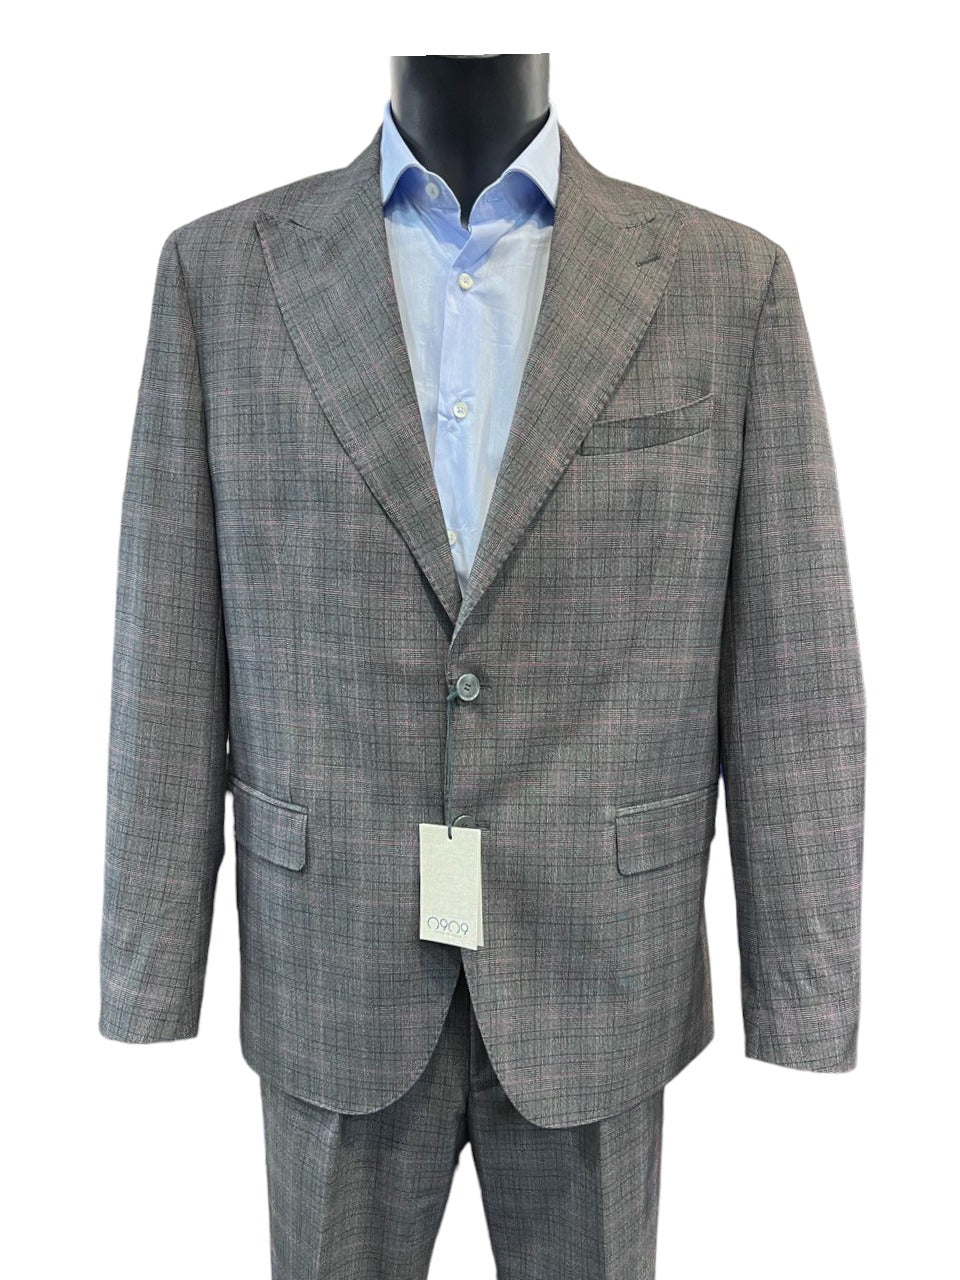 Suit 0909 Men - Gray with burgundy stripes